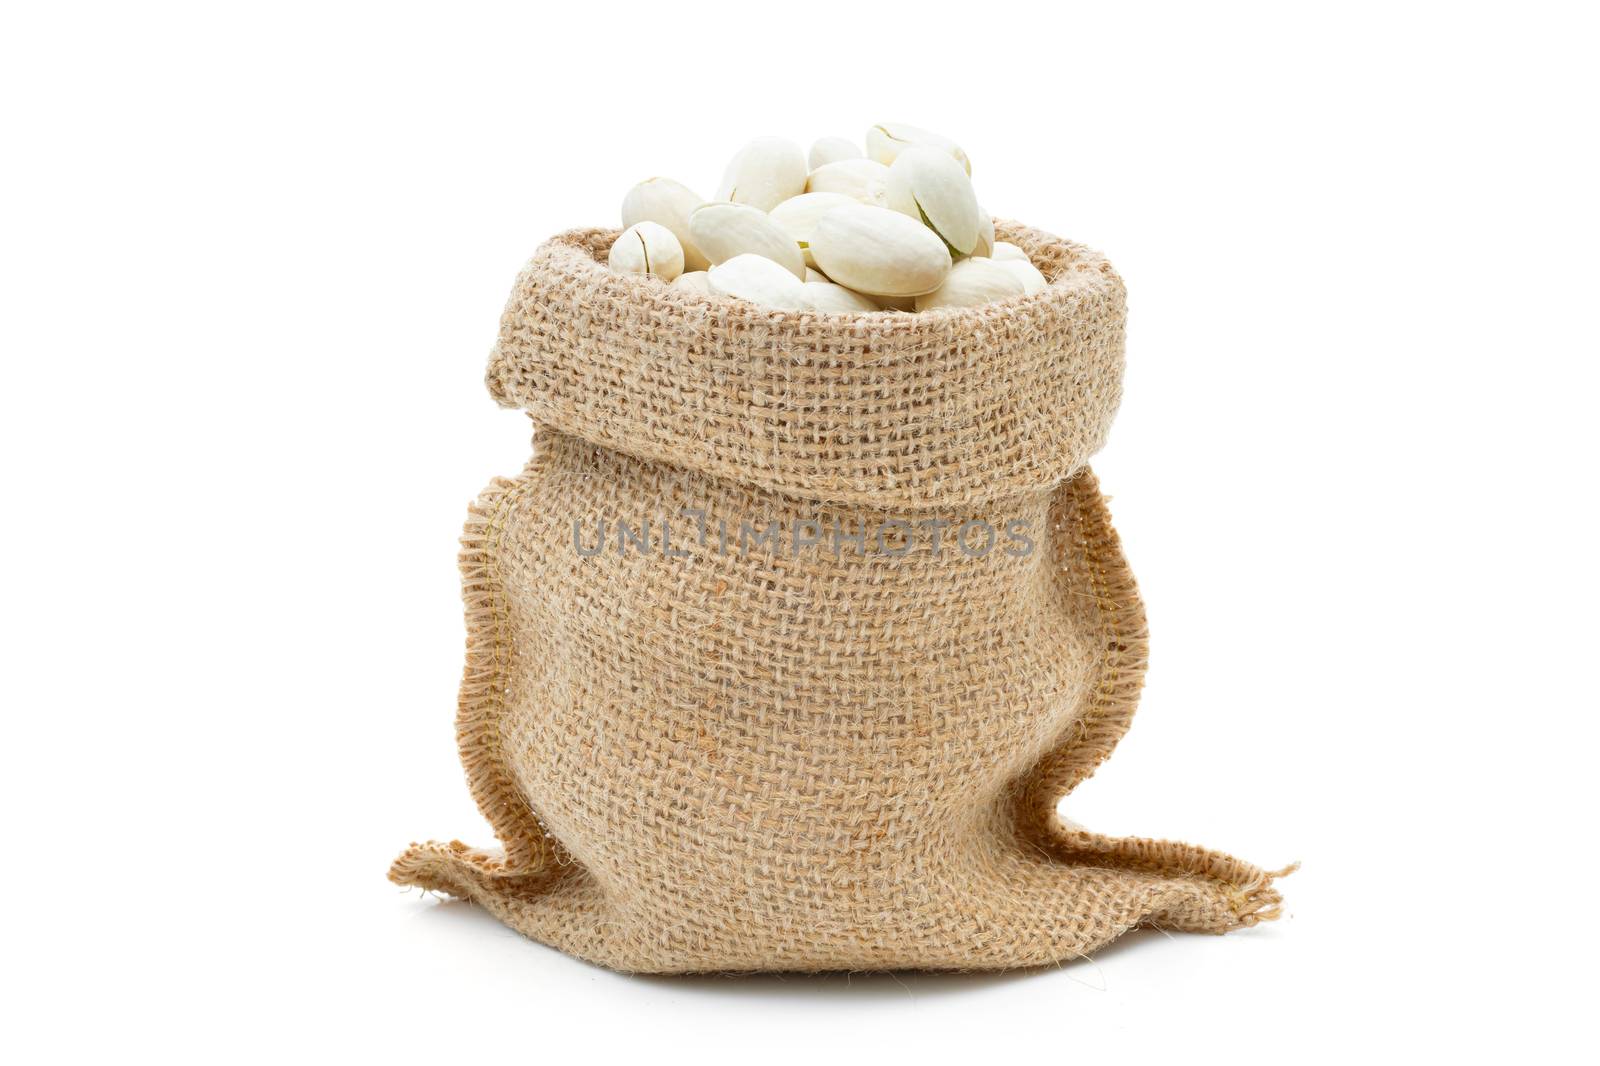 Pistachio in a sack on a white background by sompongtom